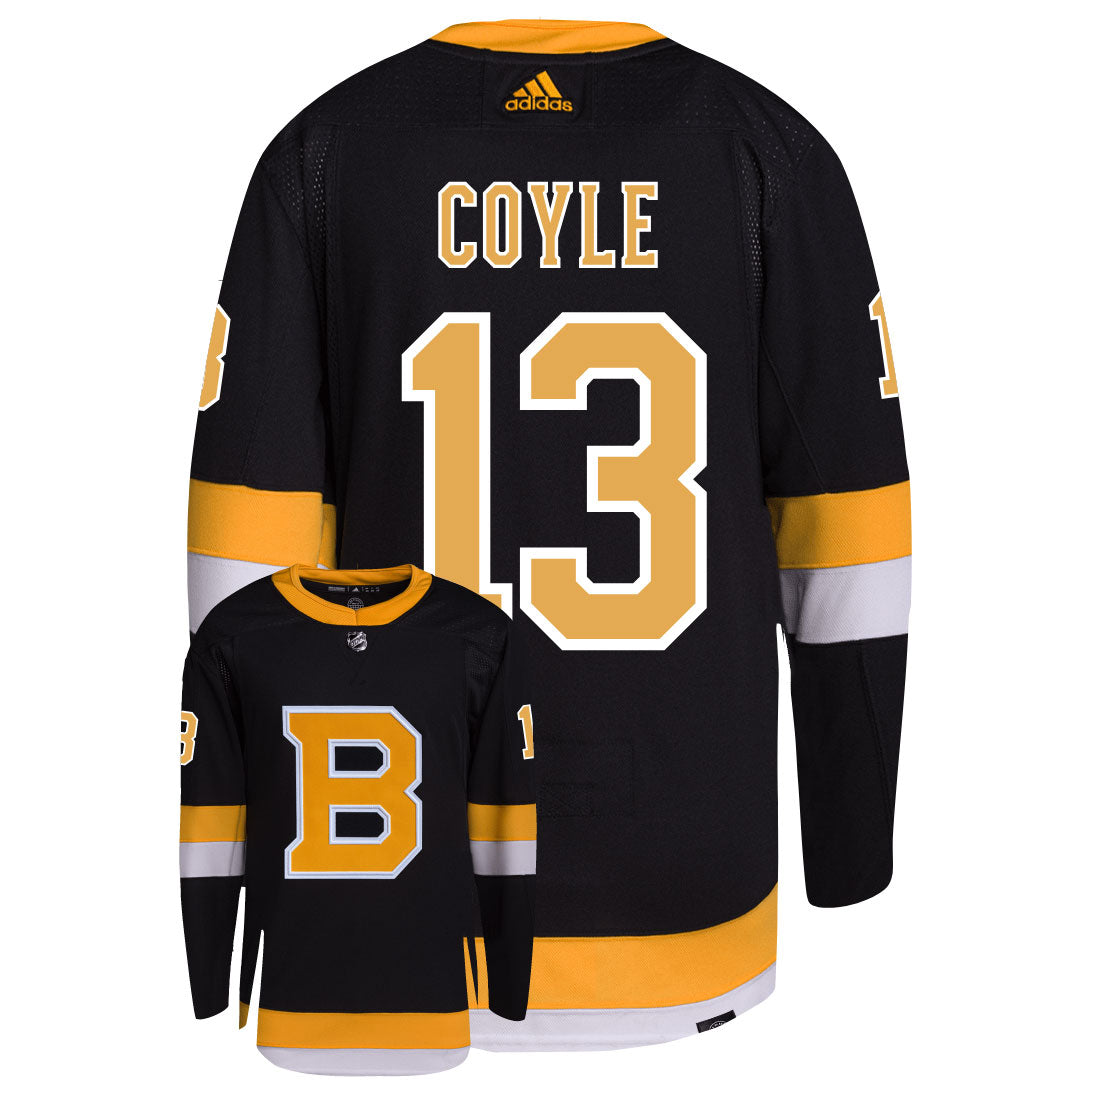 Charlie Coyle Boston Bruins Adidas Primegreen Authentic Third Alternate NHL Hockey Jersey - Back/Front View